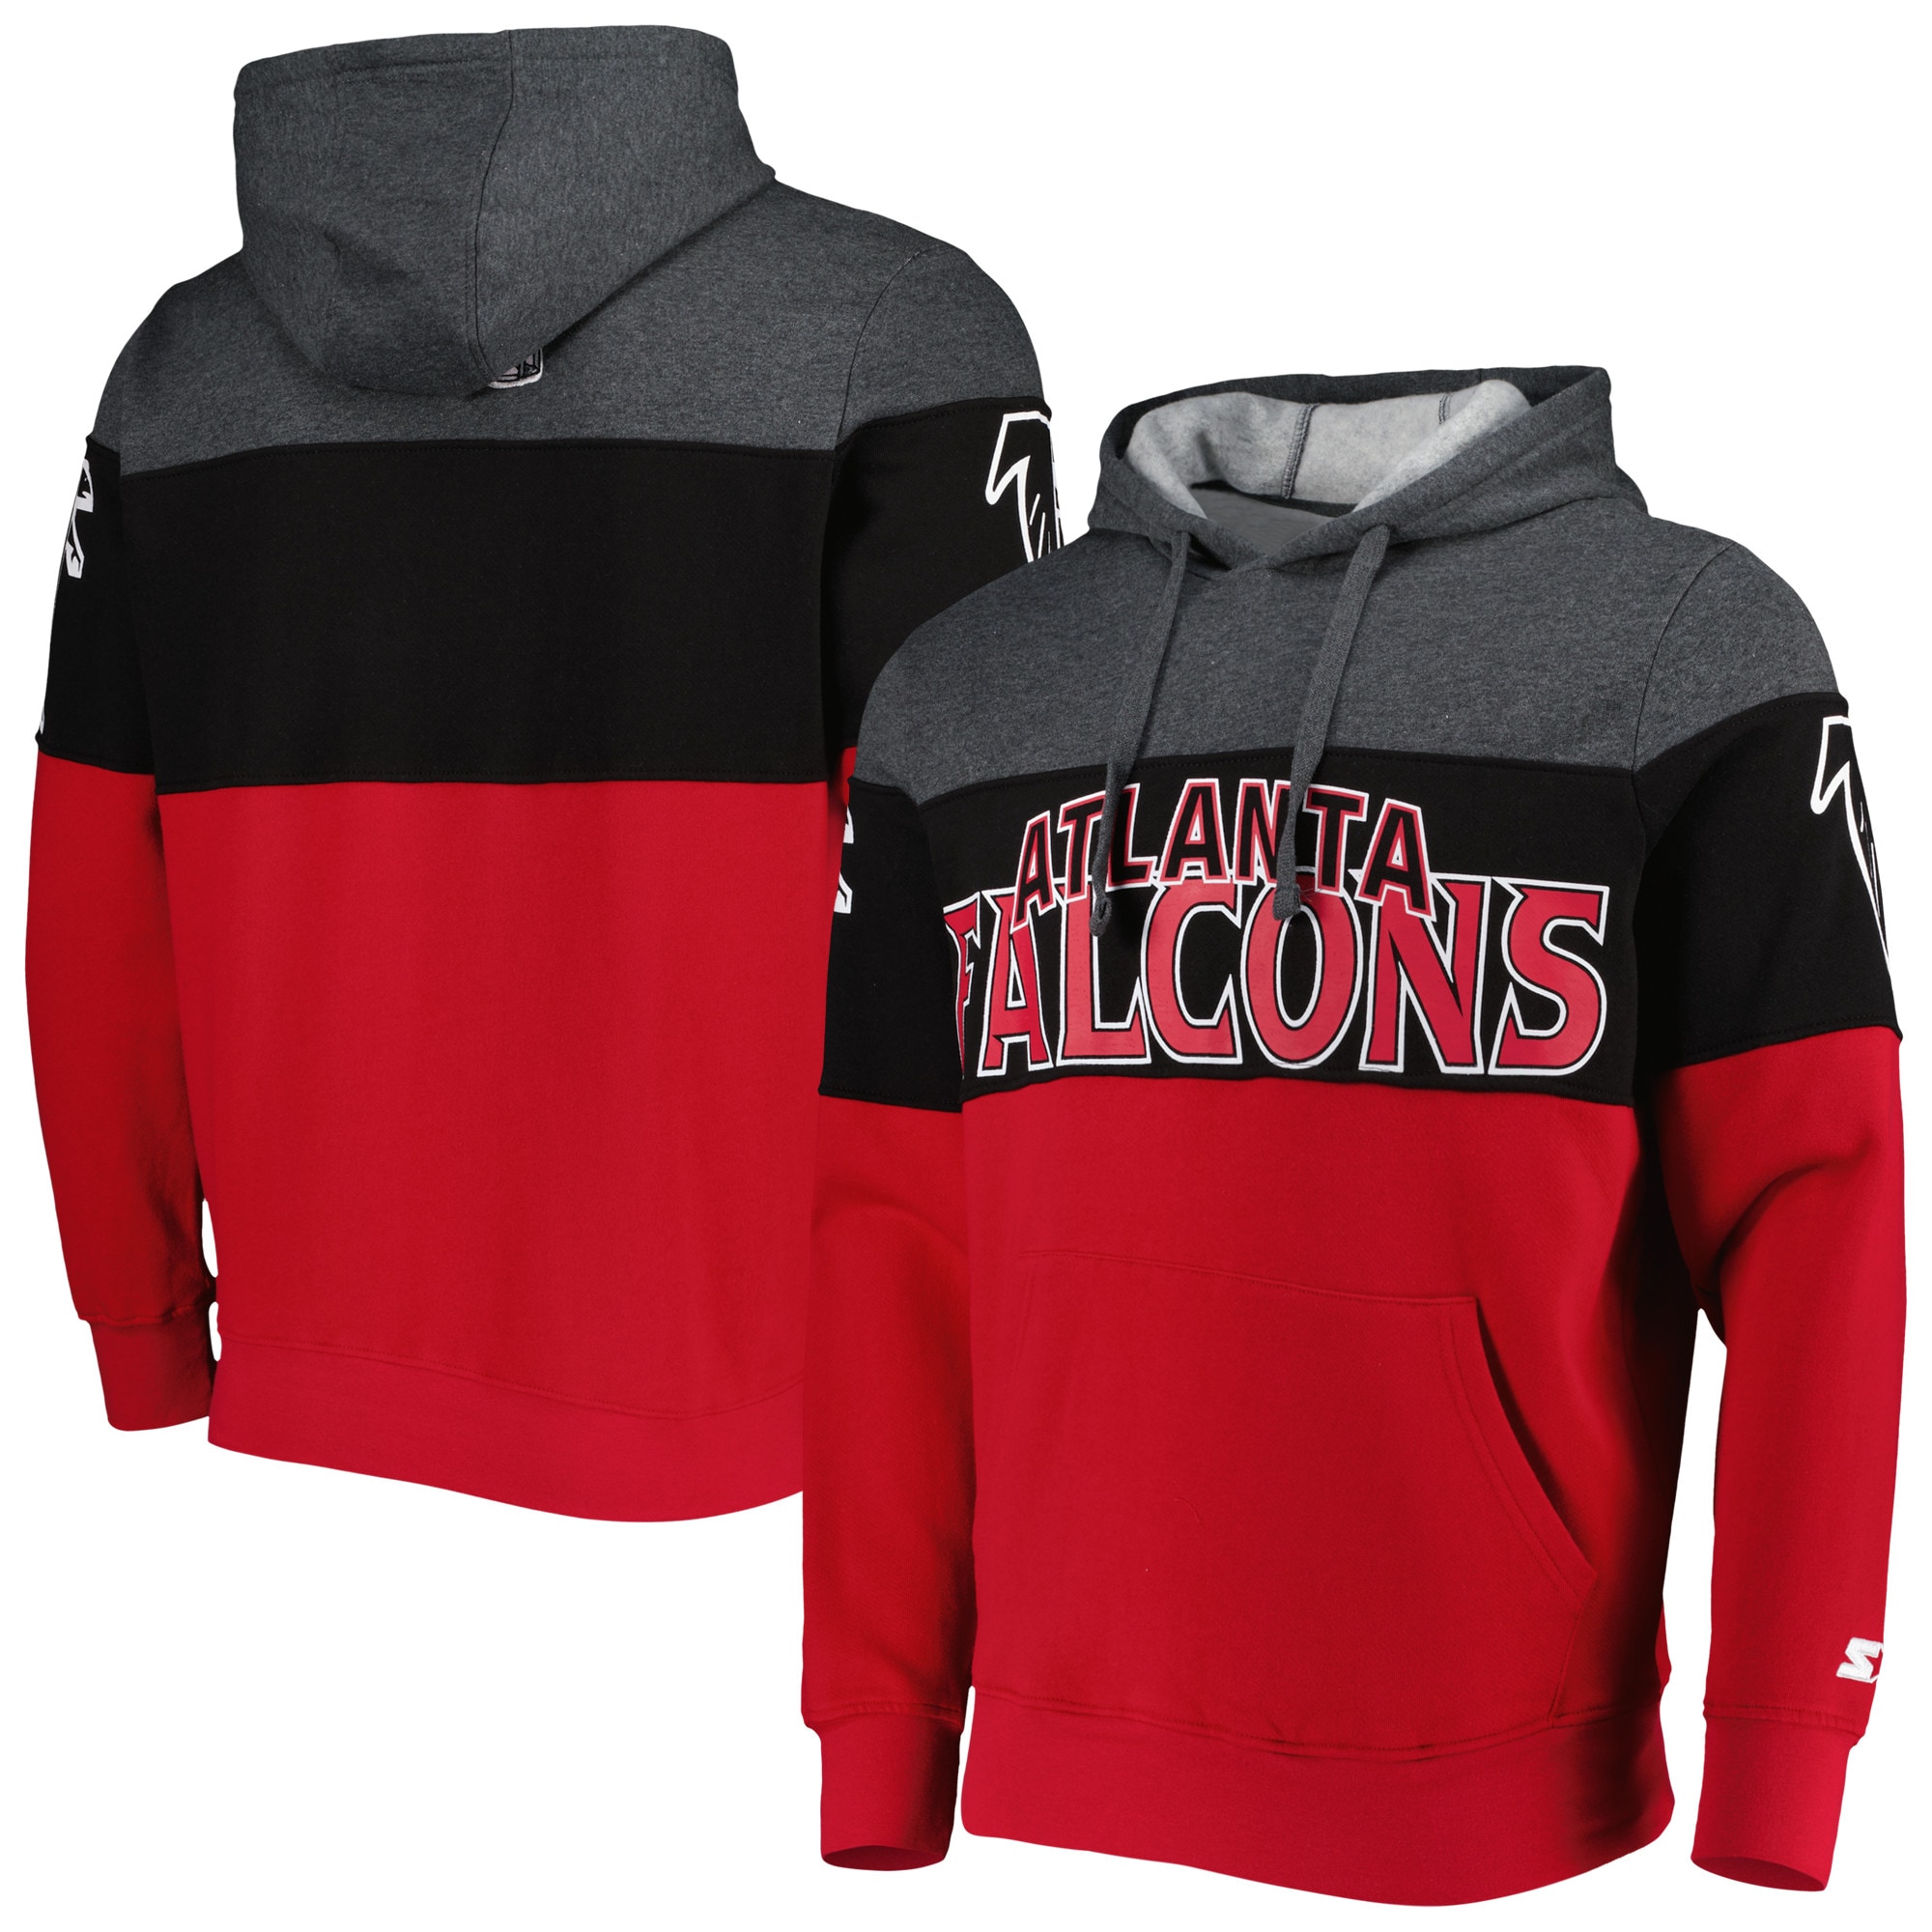 Atlanta Falcons Starter Extreme Pullover Hoodie – Heather Charcoal/Red